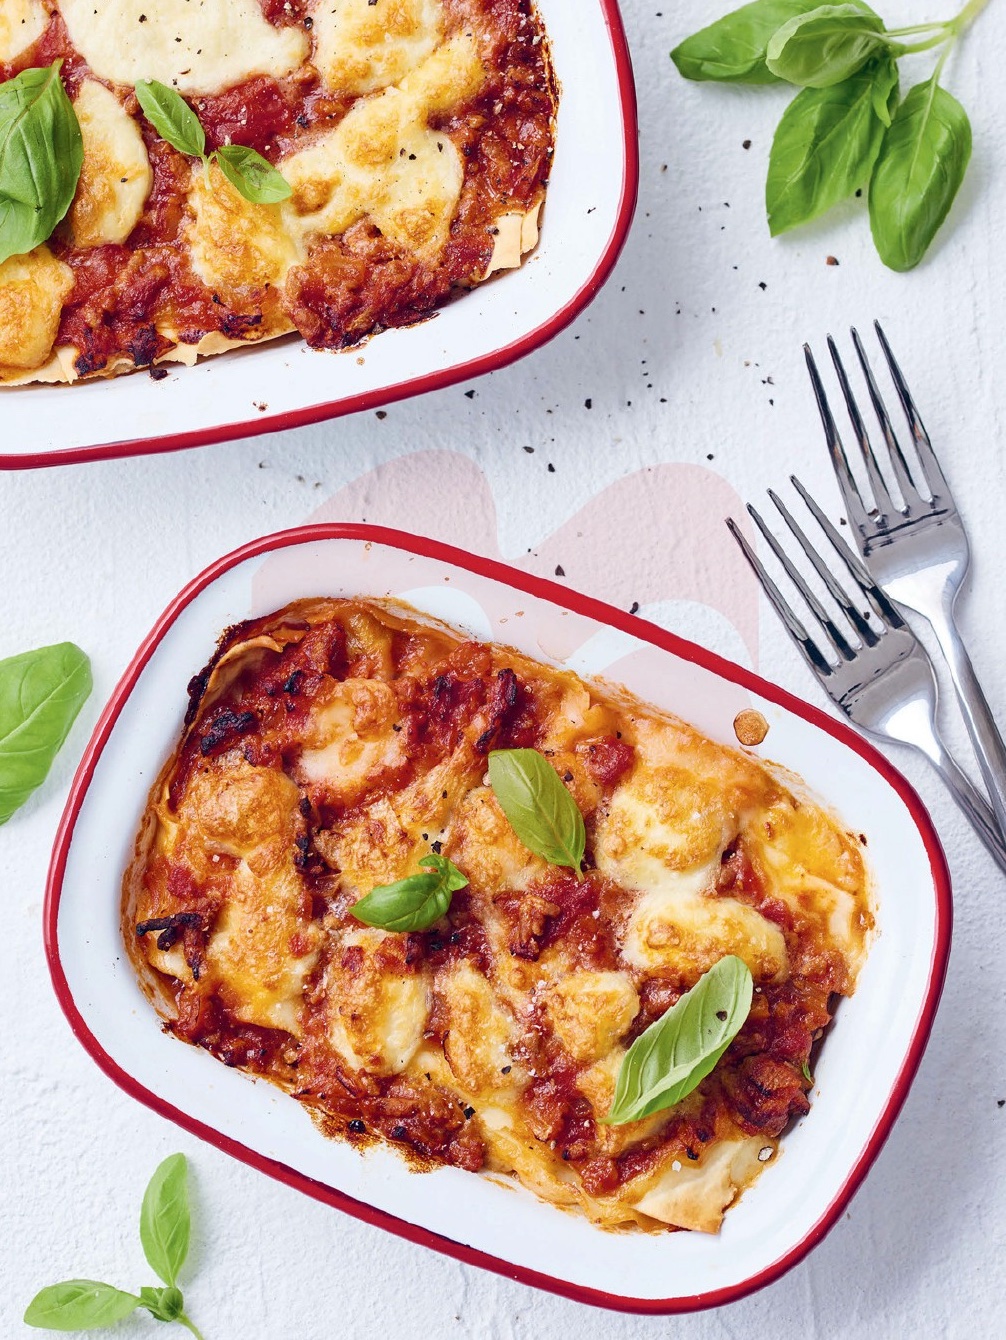 Here's A Lasagne Recipe You Can Make Using An Air Fryer